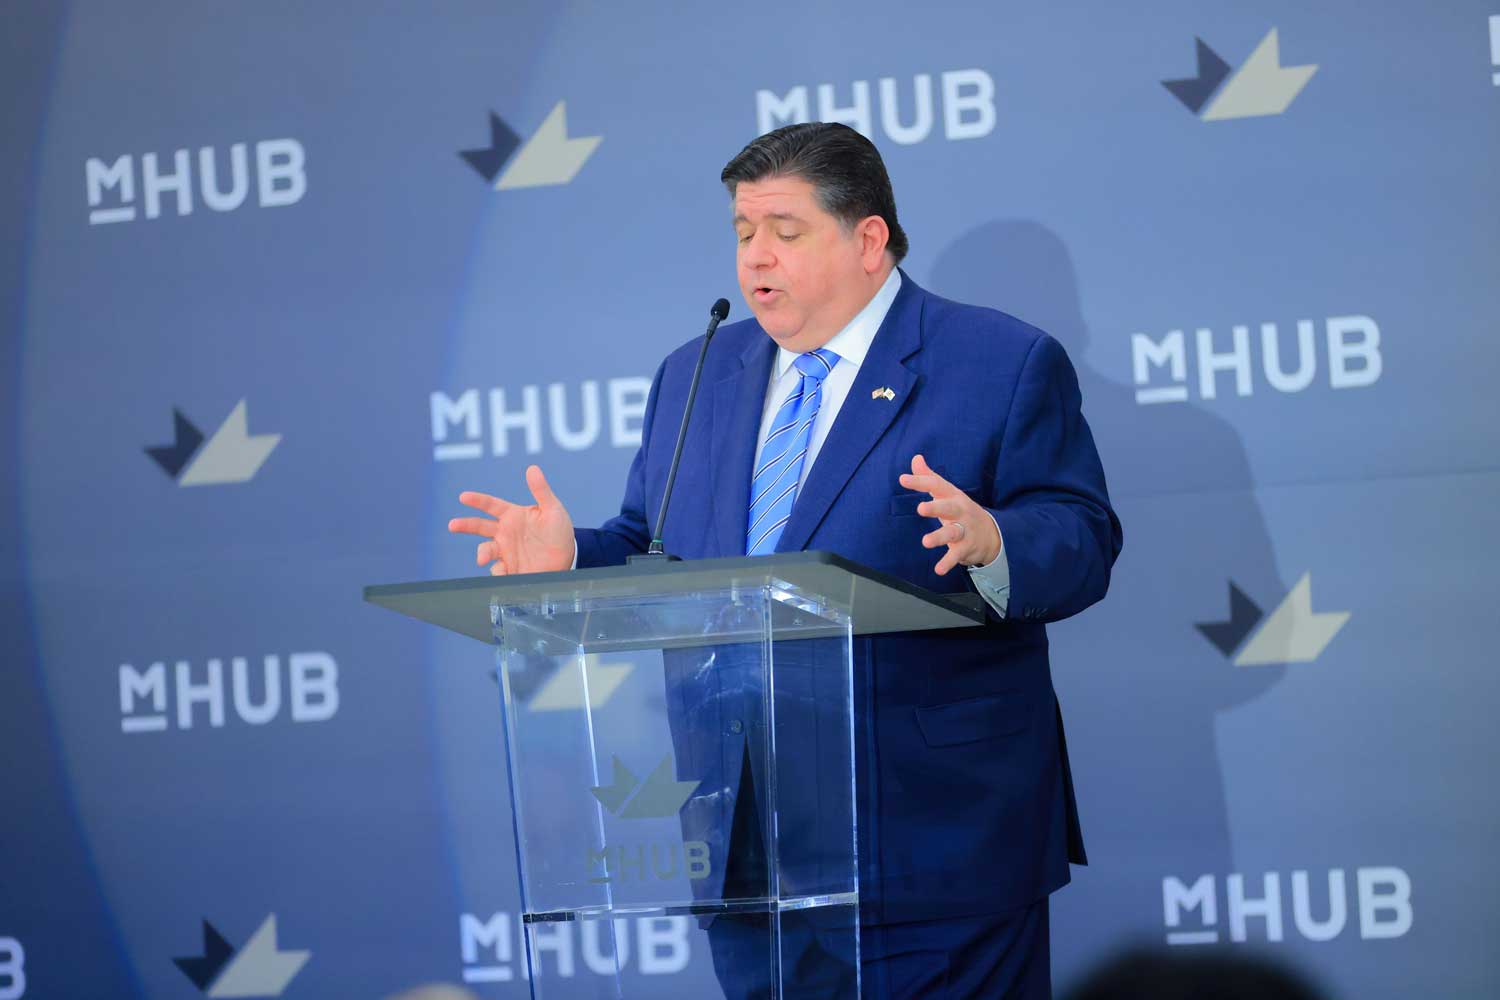 A man in a suit speaking at a podium with the "mhub" logo in the background.